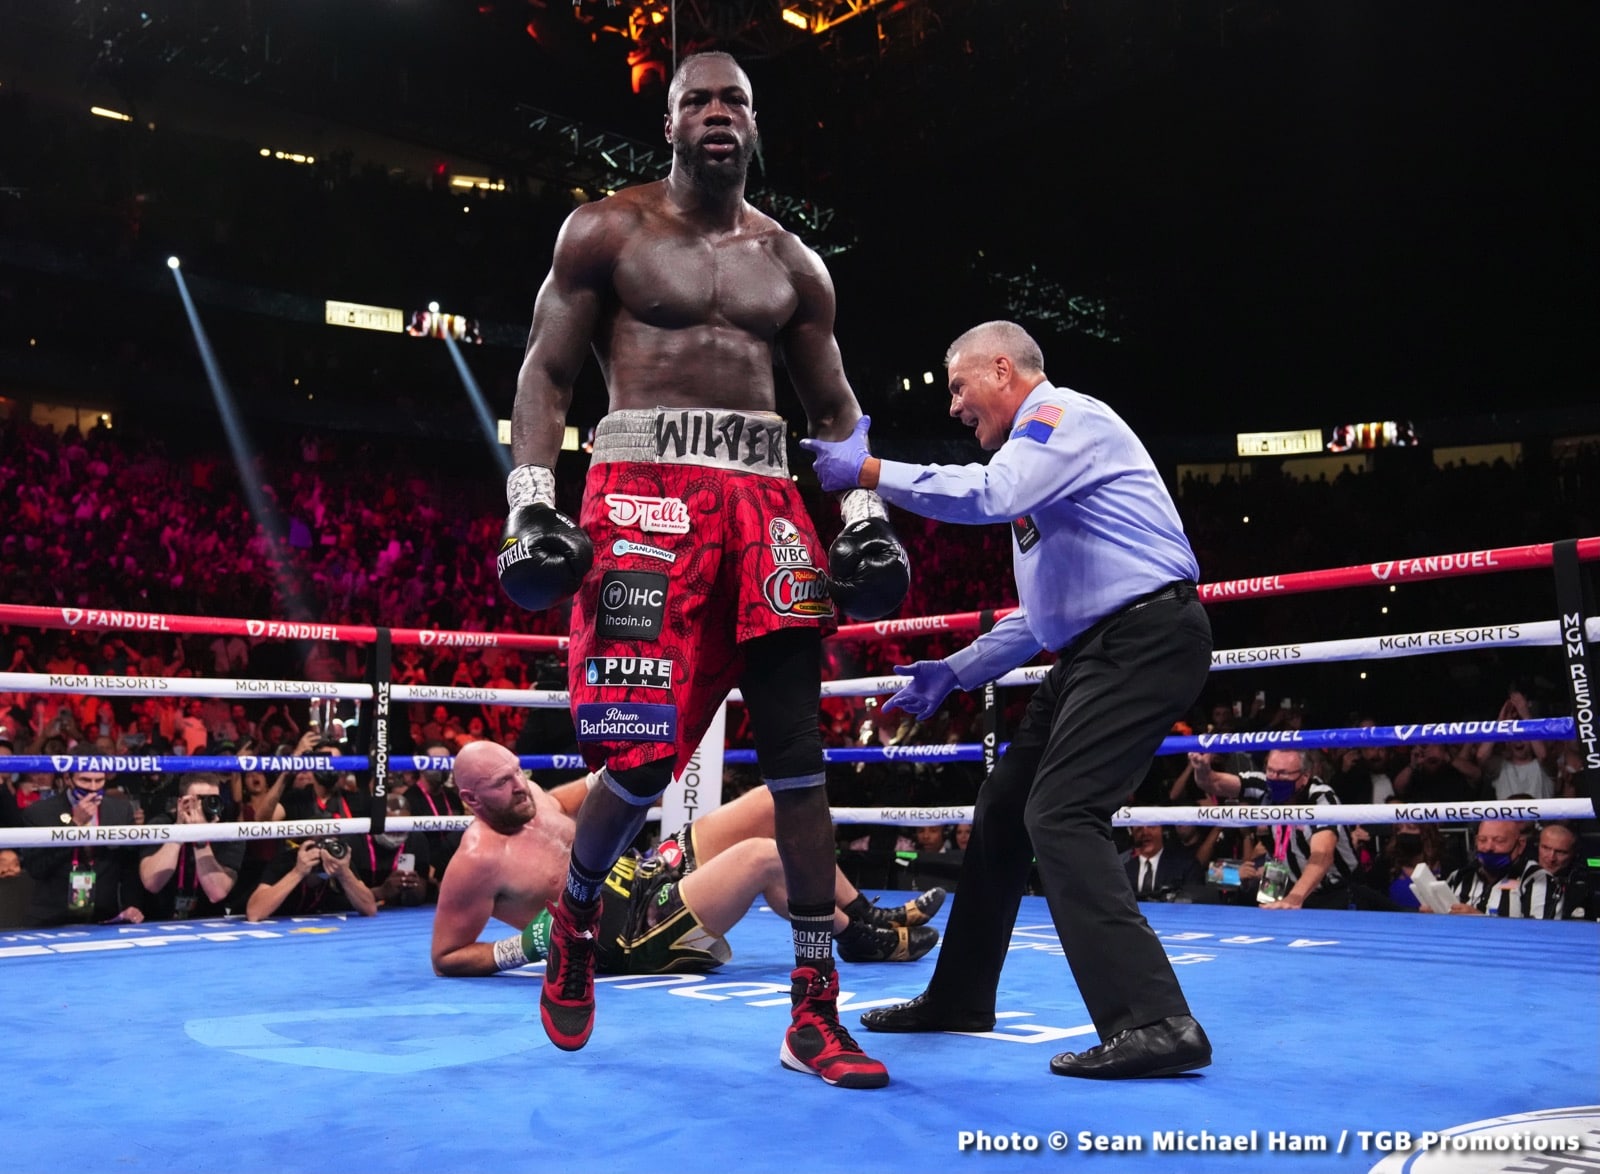 Tyson Fury sent into retirement by Deontay Wilder: "I've had enough, I don't want to fight no more"